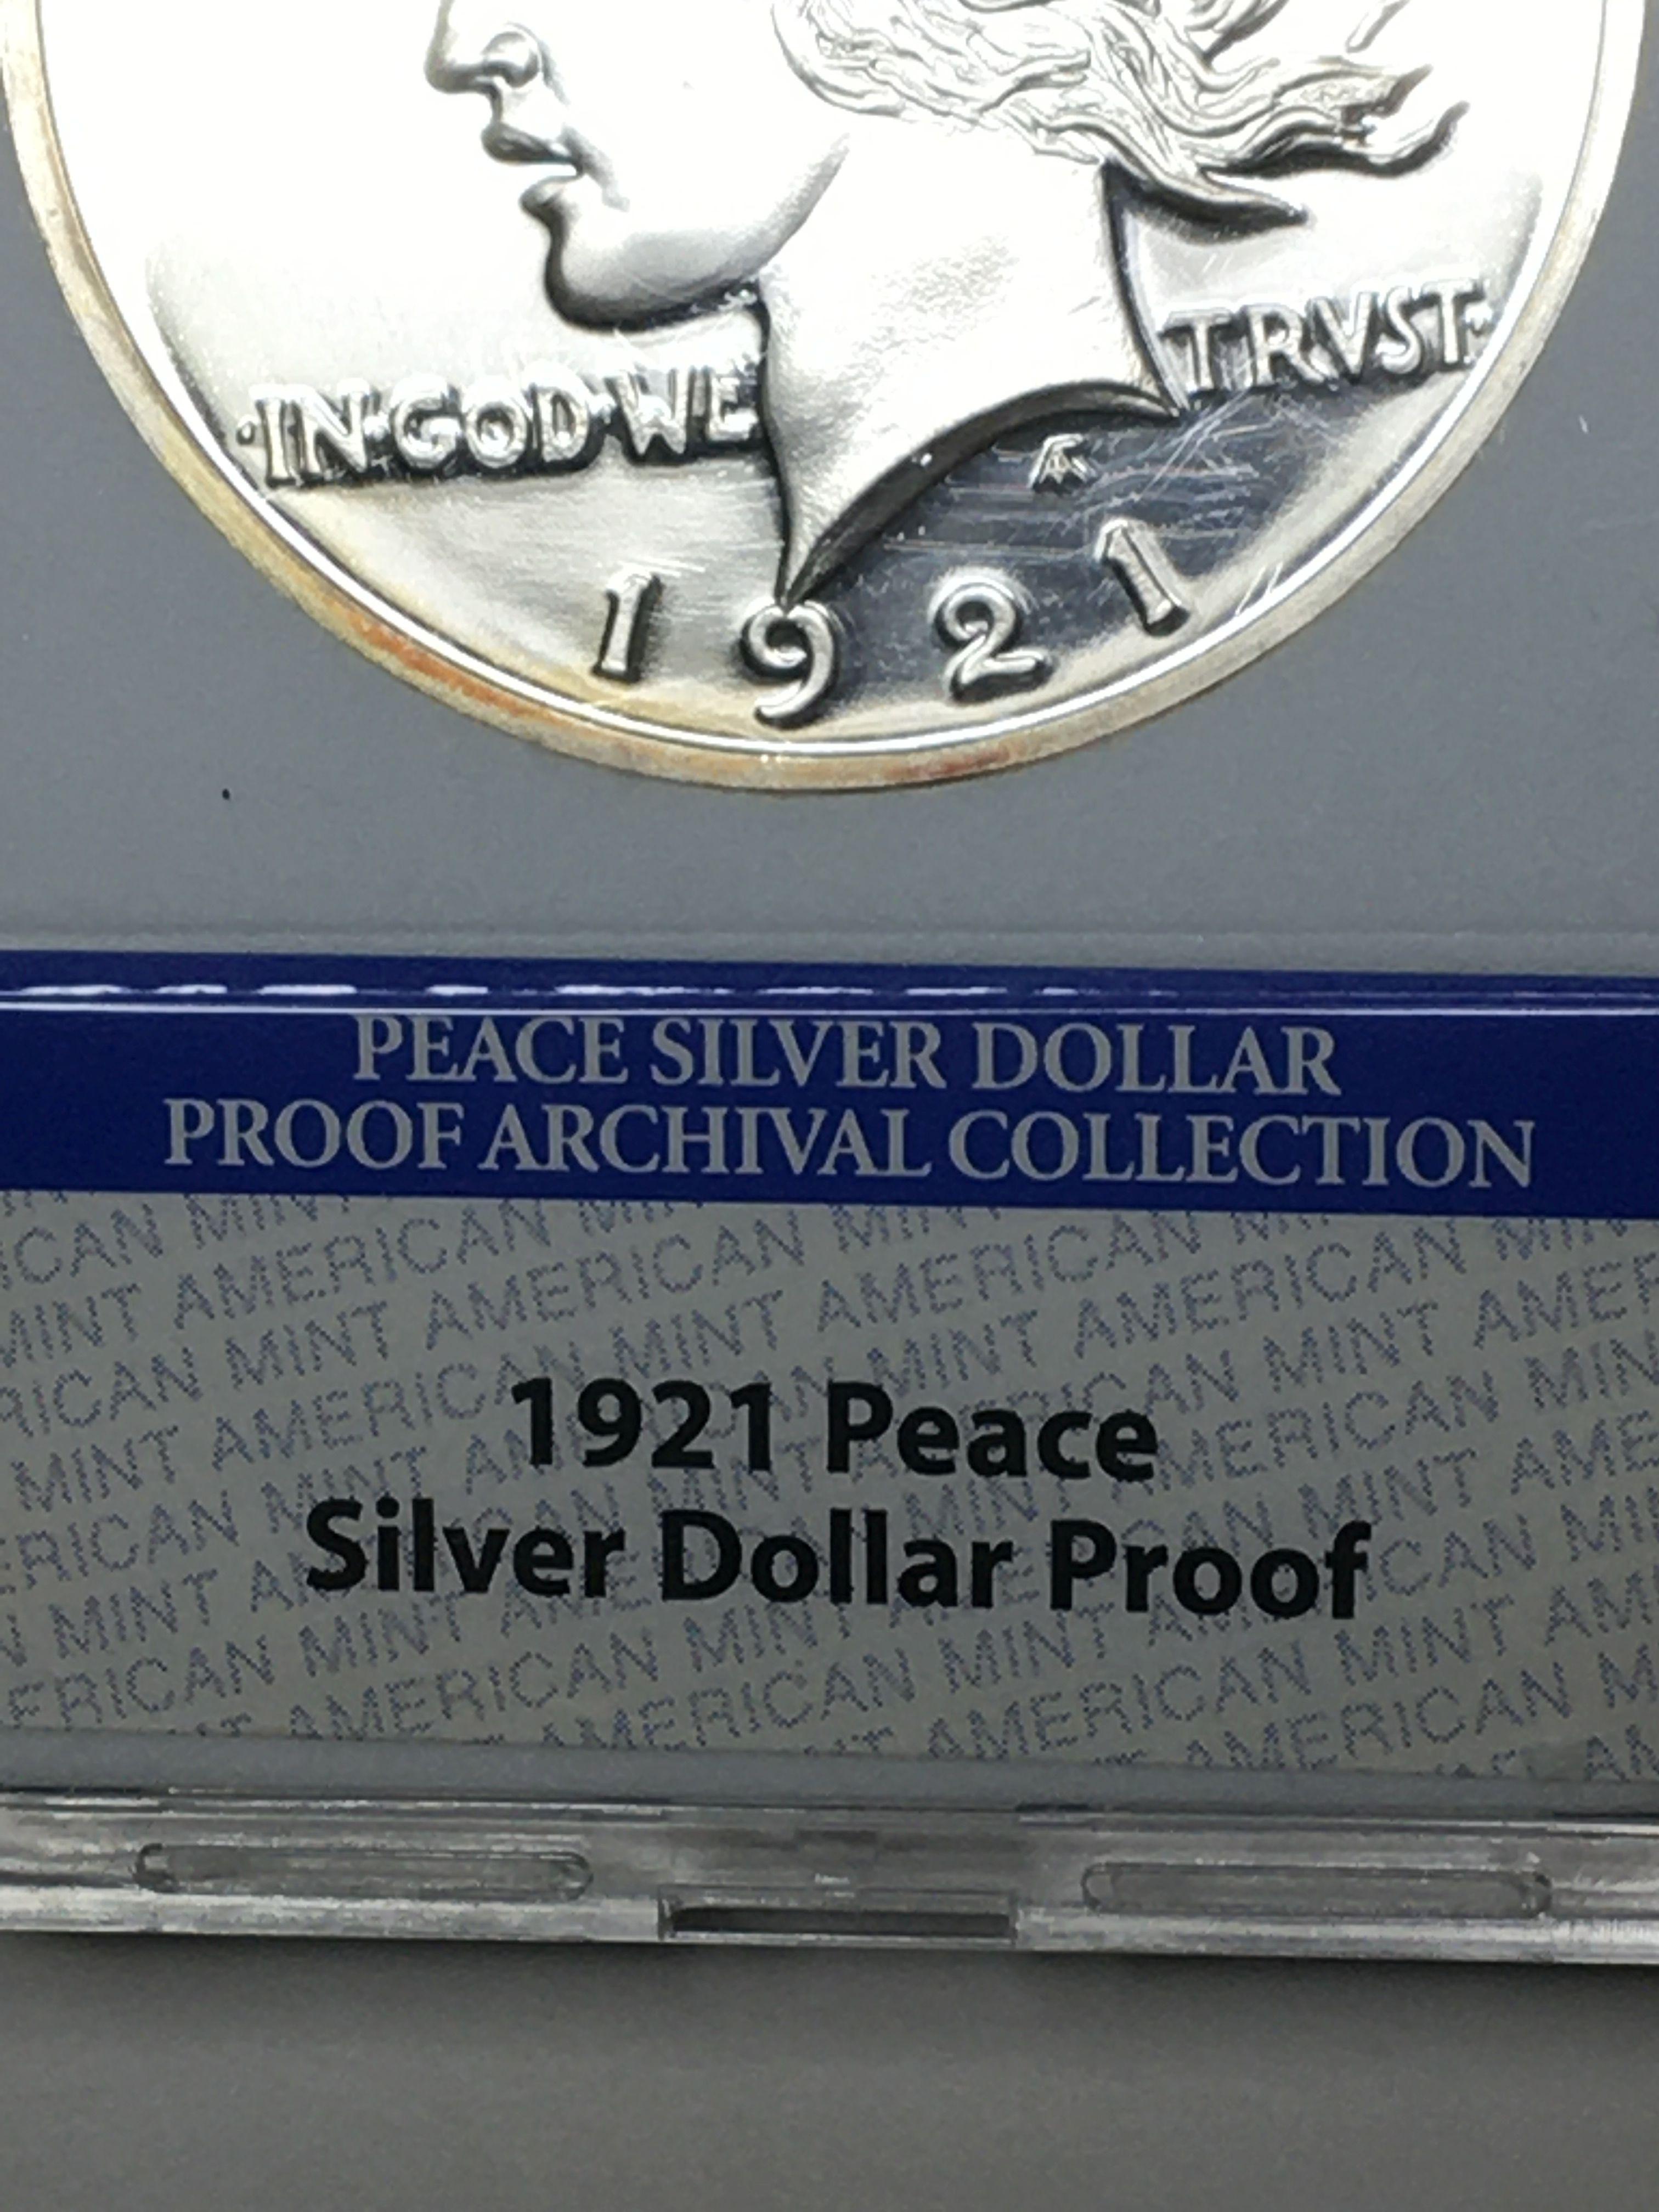 1921 Silver Dollar Proof Peace Dollar Replica .999 Pure Silver .76 Troy Slabbed